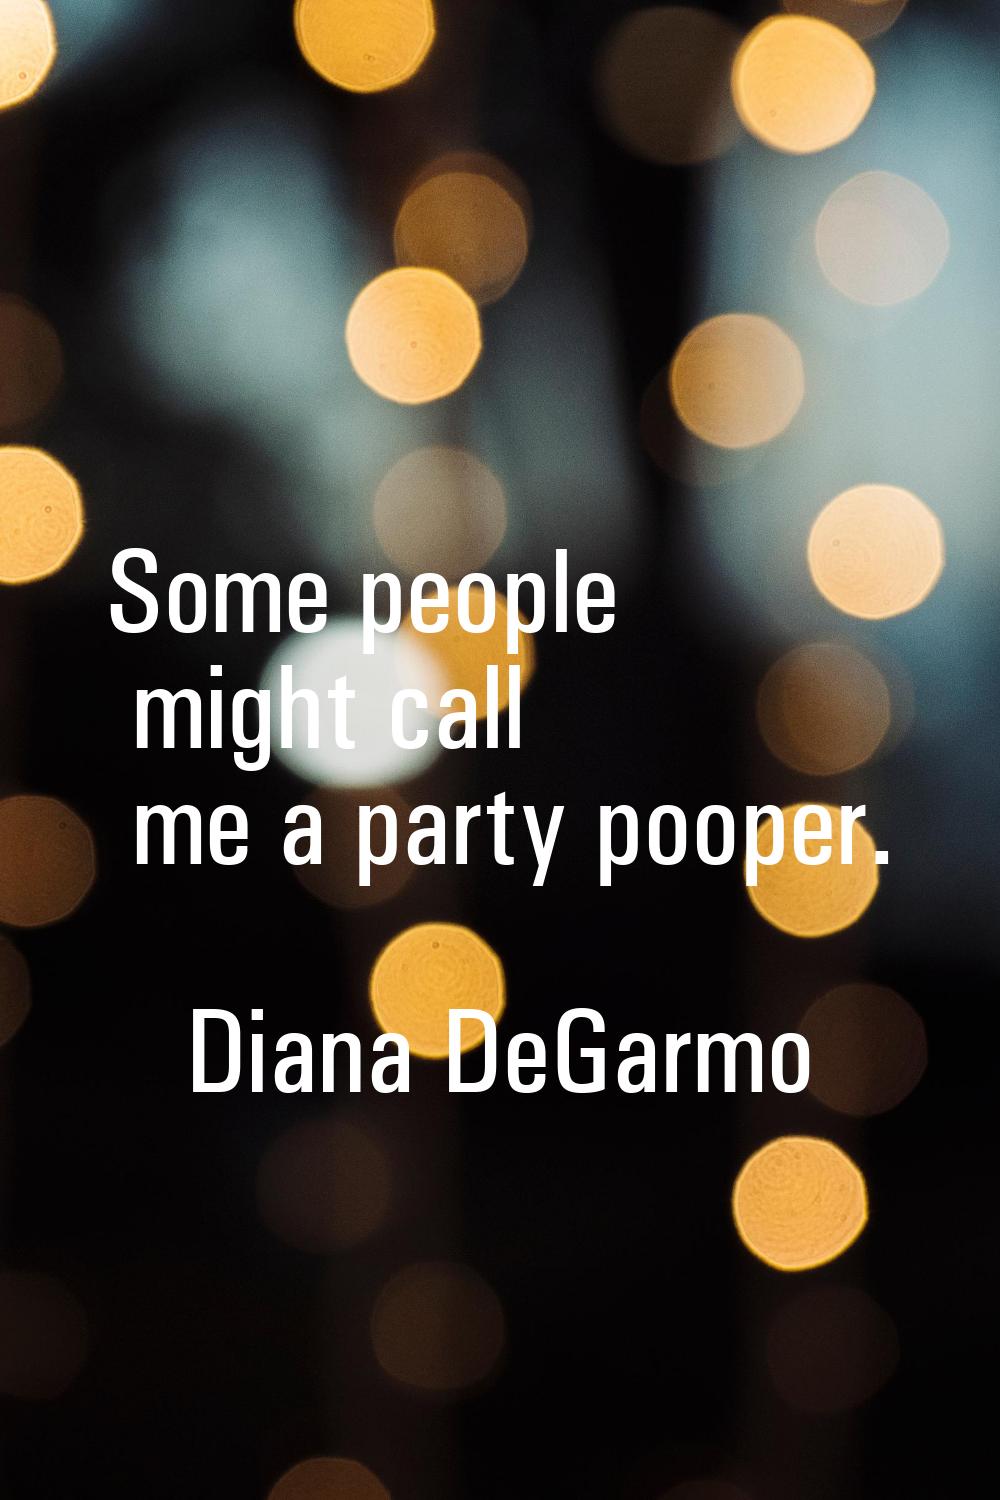 Some people might call me a party pooper.